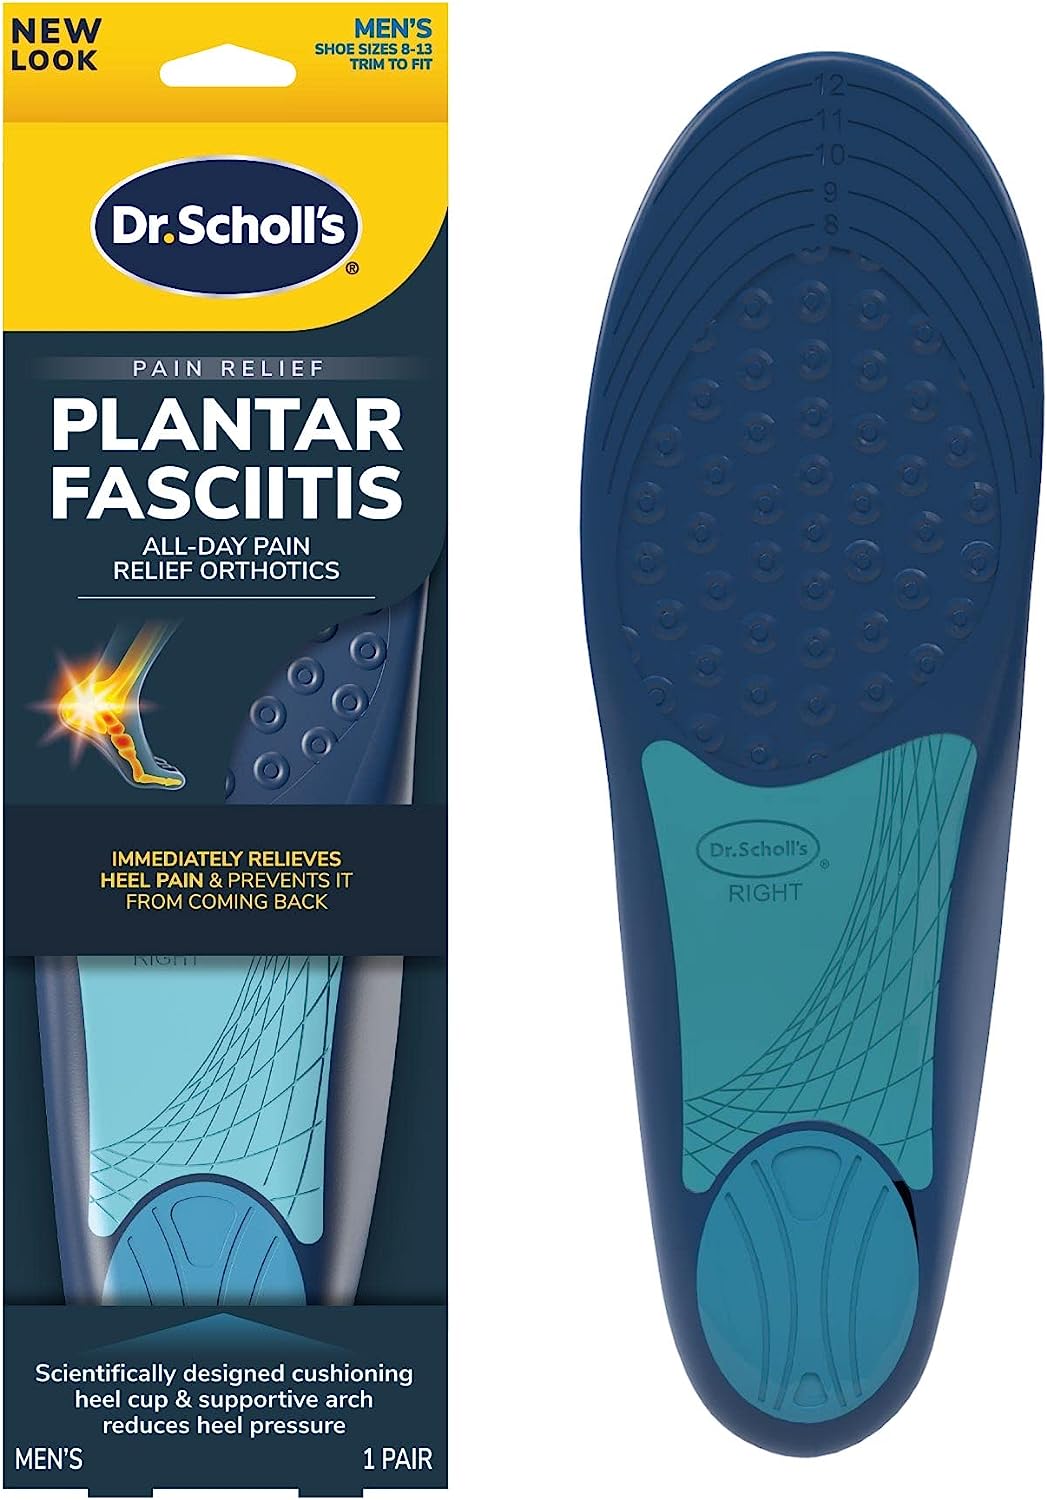 Dr. Scholl’s® Plantar Fasciitis Pain Relief Orthotic Insoles $10.00/ea when you order two $19.37